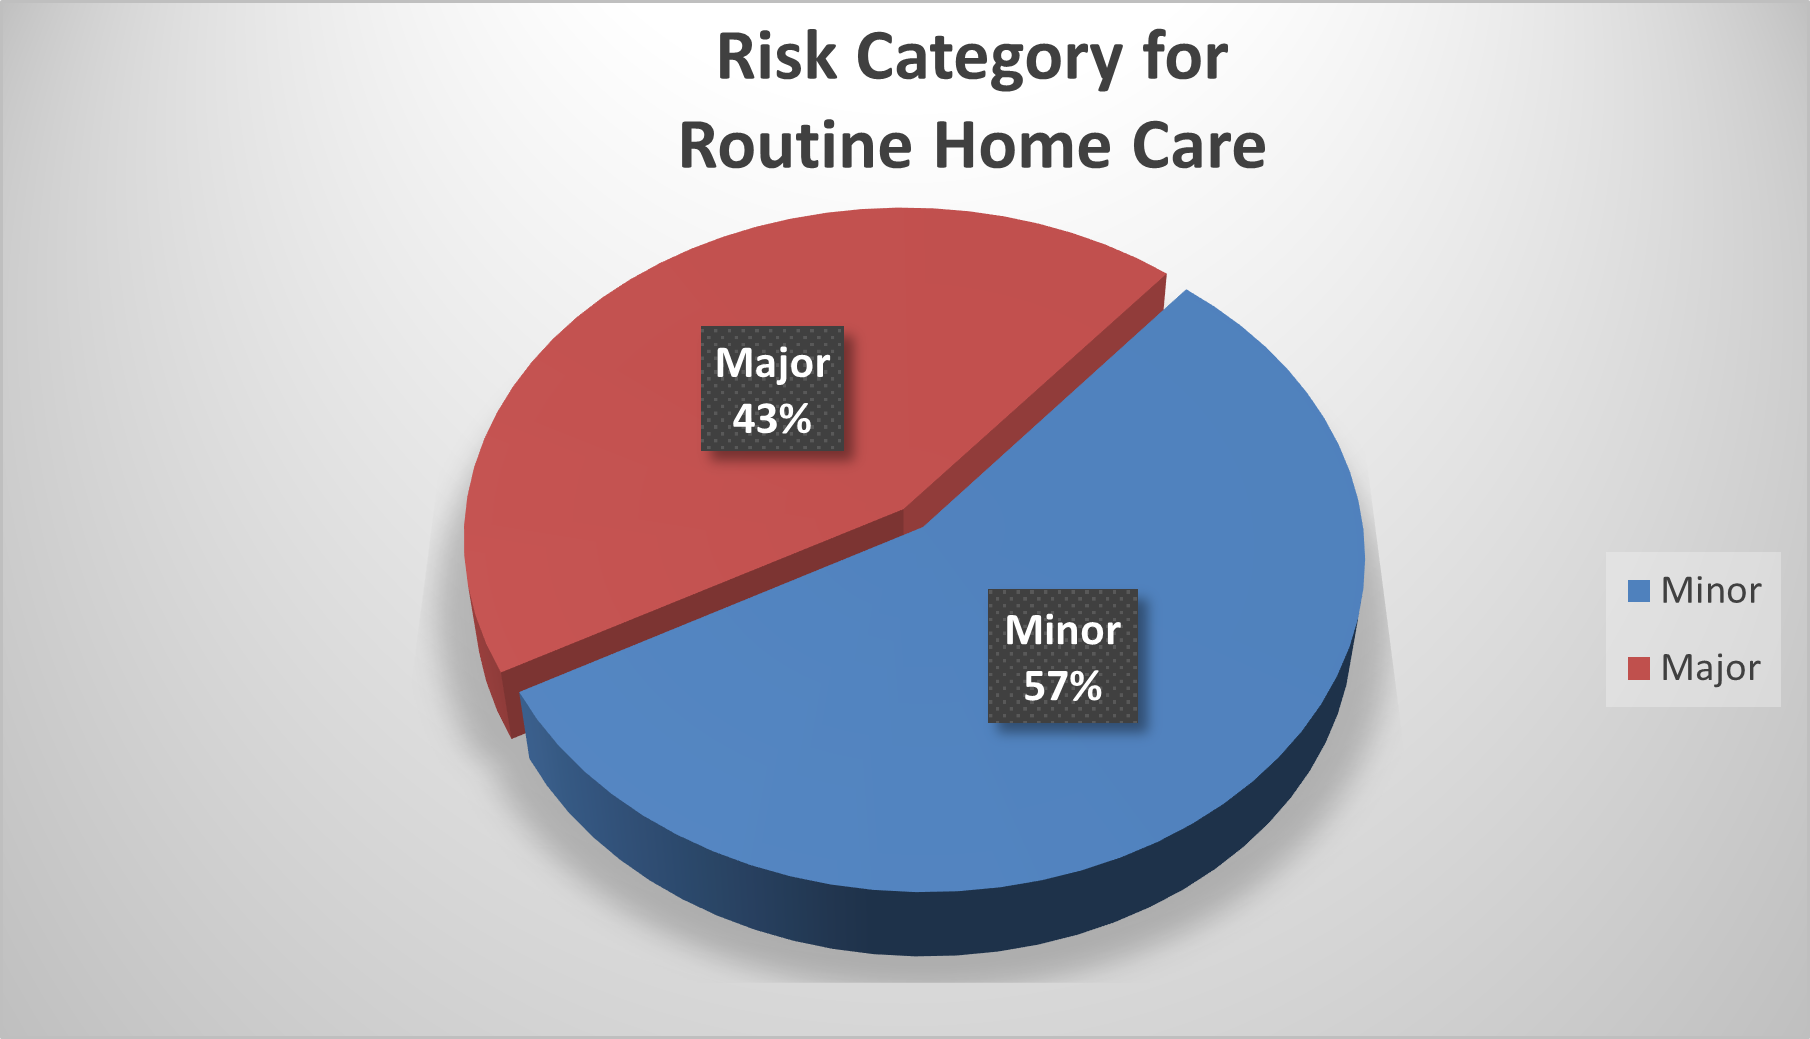 Risk Categories for Routine Home Care (RHC) are defined as: major 43 percent and minor 57 percent.